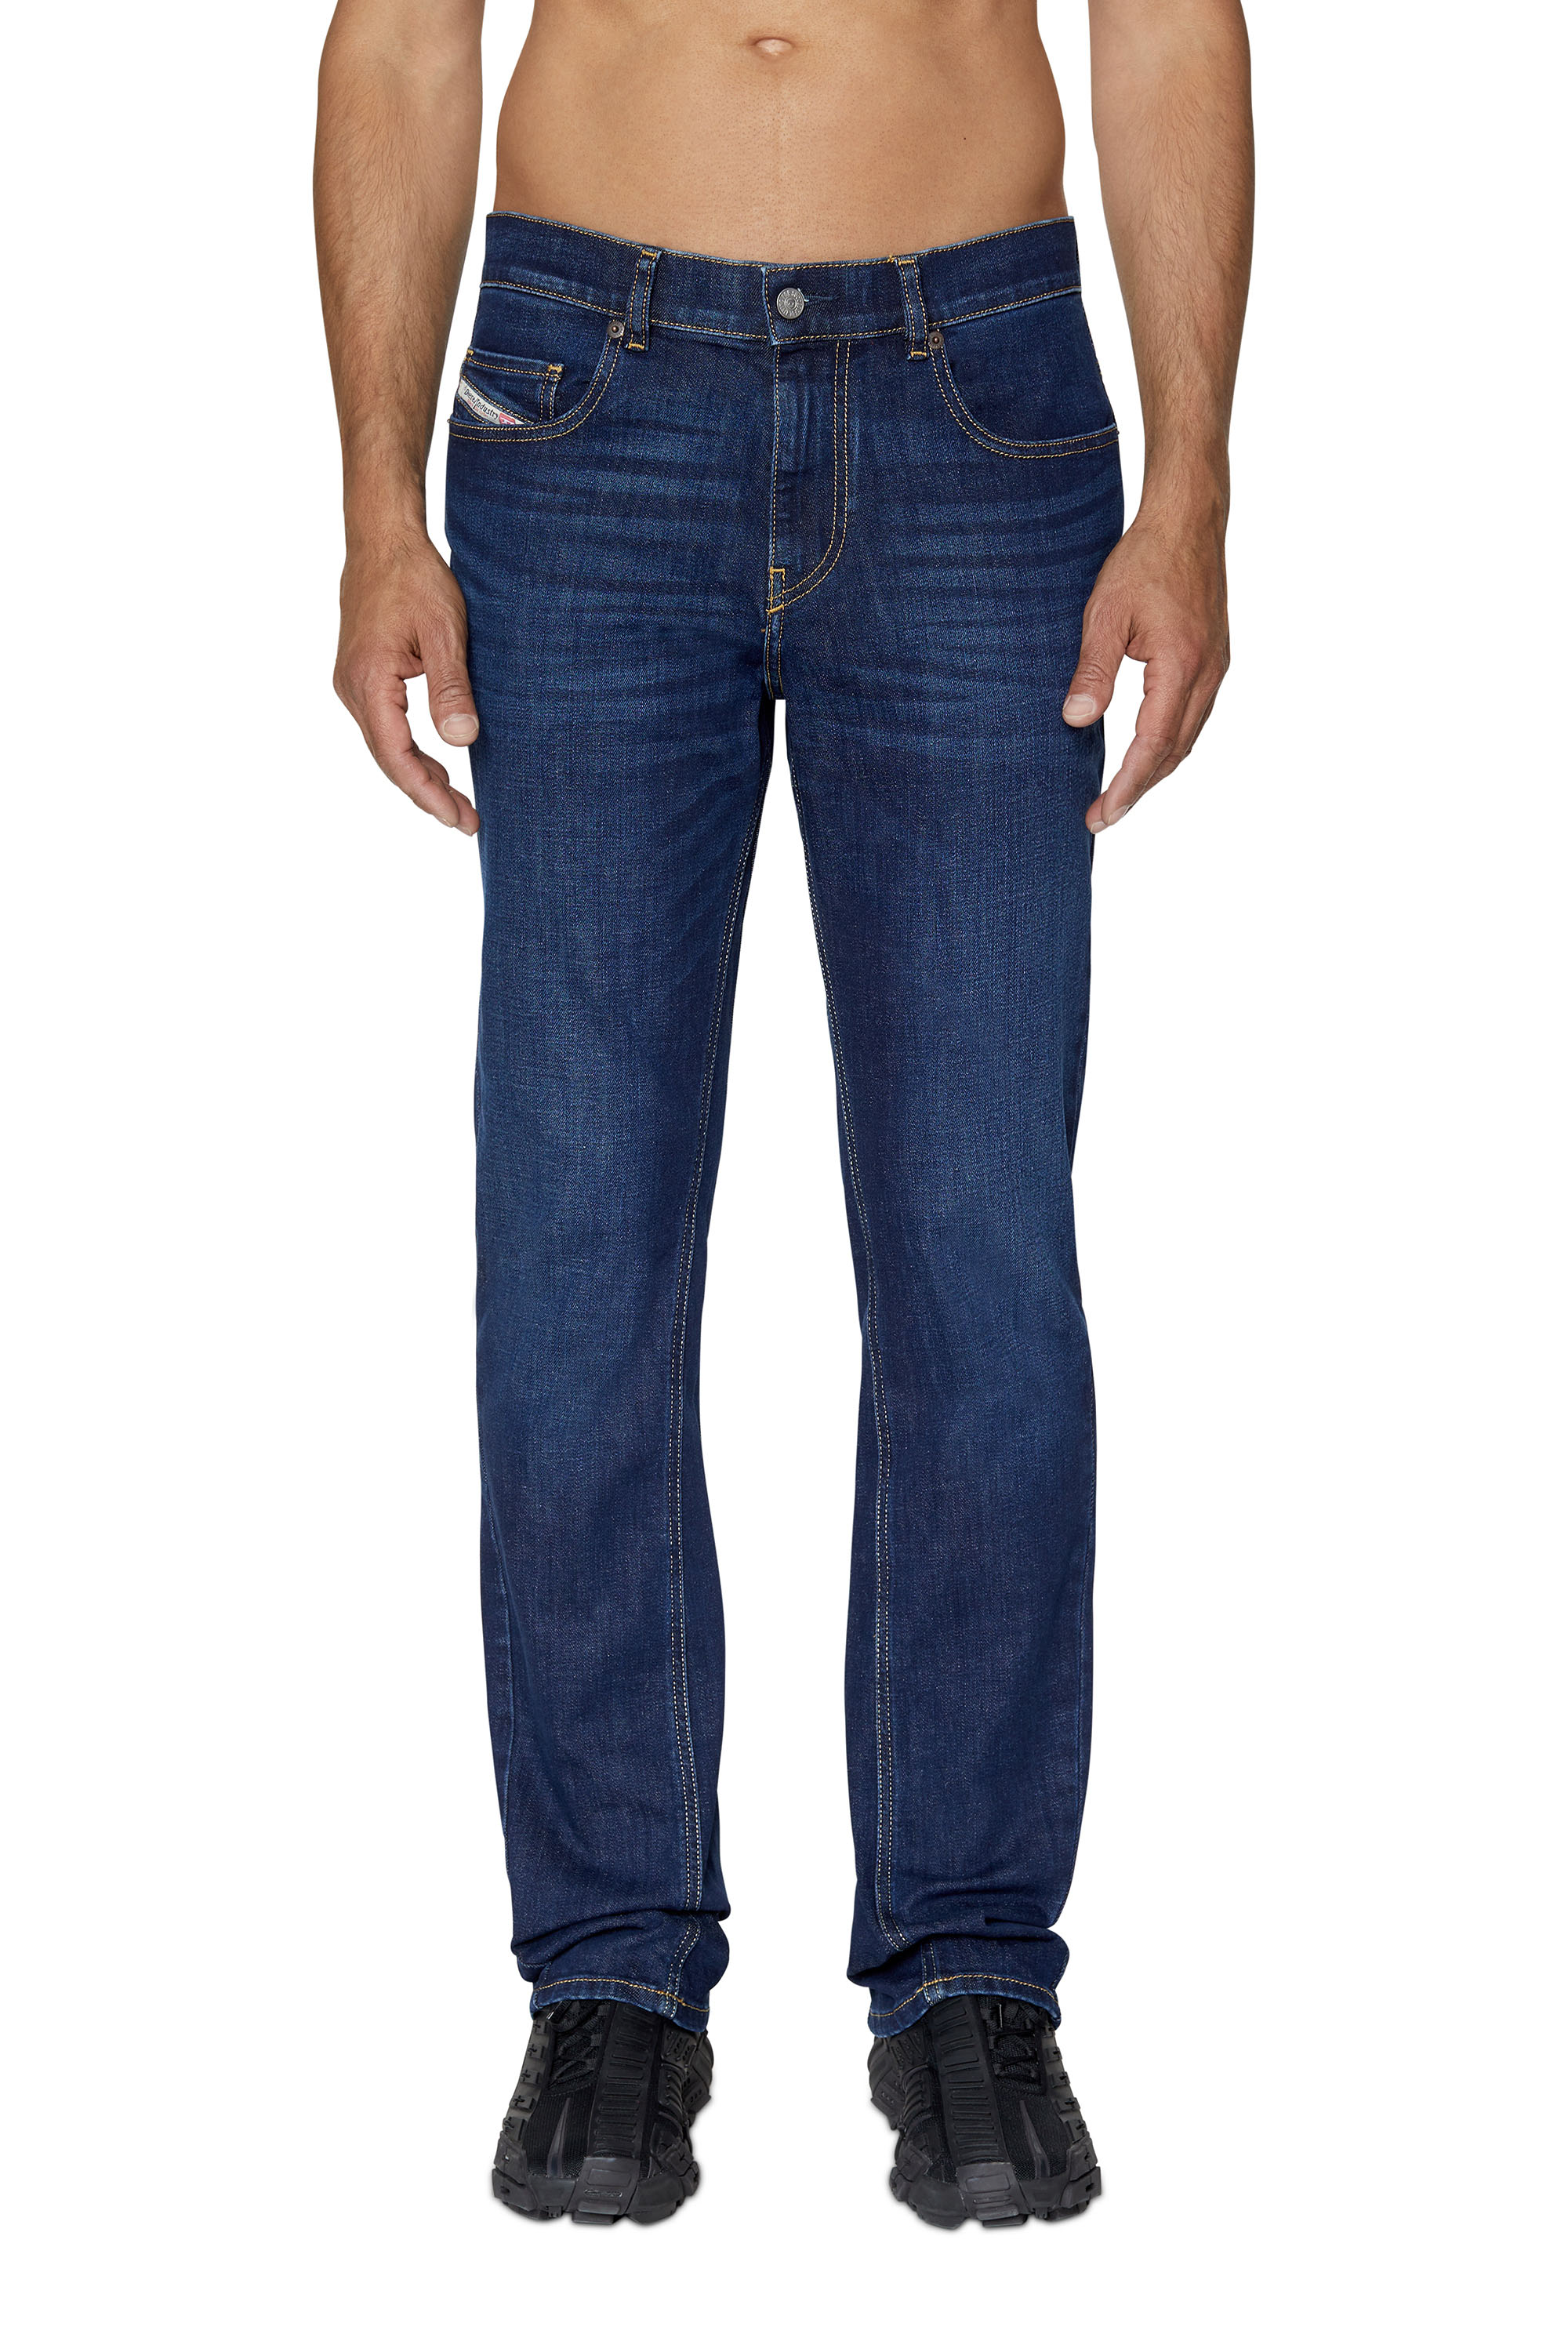 2021 Z9B89 Hombre: Bootcut Azul oscuro | Diesel Library